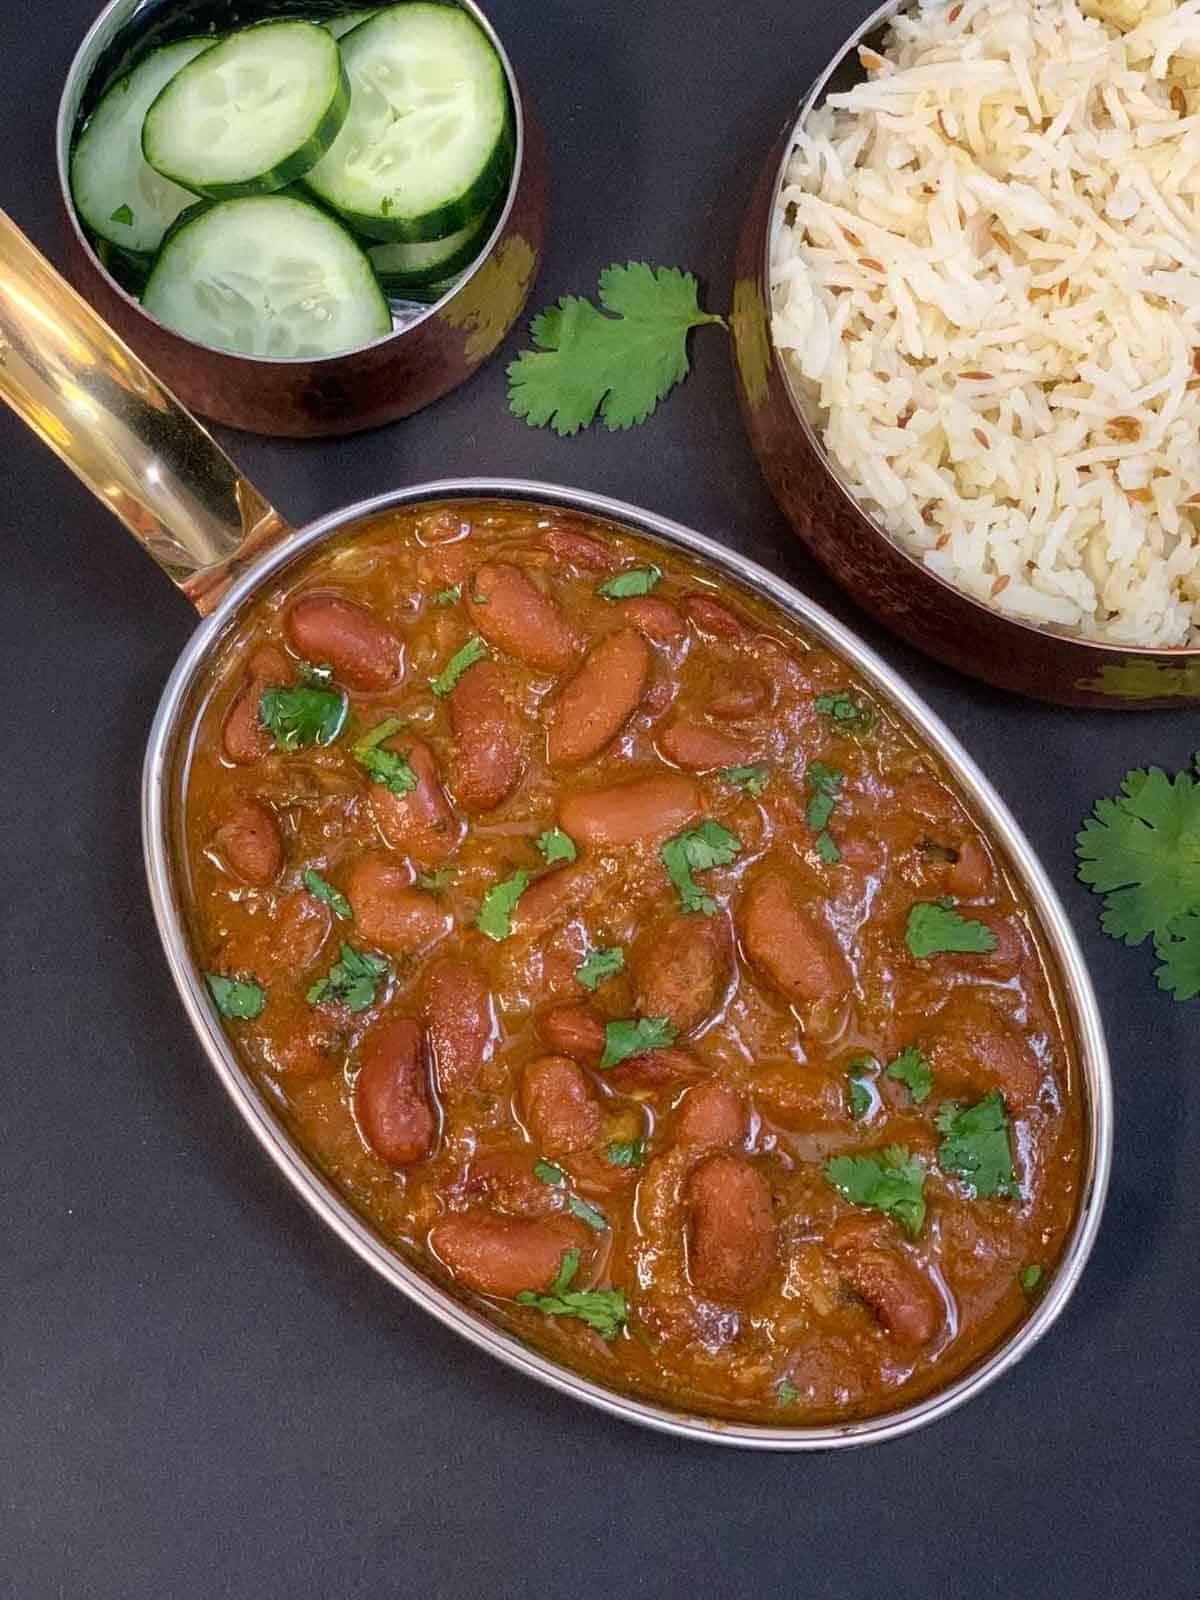 Punjabi Rajma Masala served in a serving bowl with cucumbers and jeera rice on the side